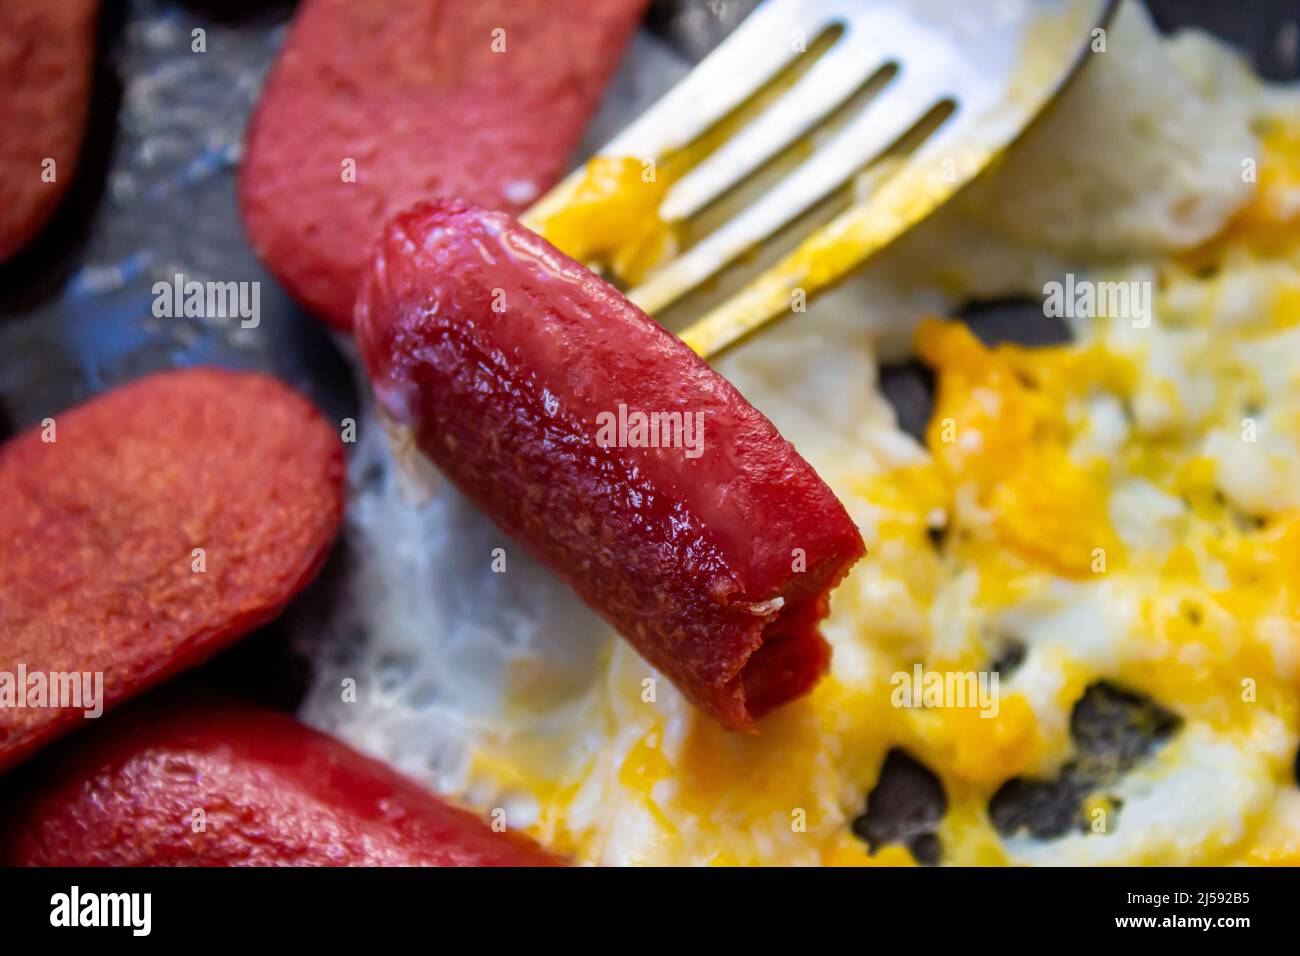 Fried egg with sausage. Unhealthy breakfast food. Closeup photo of eaten sausage. Stock Photo